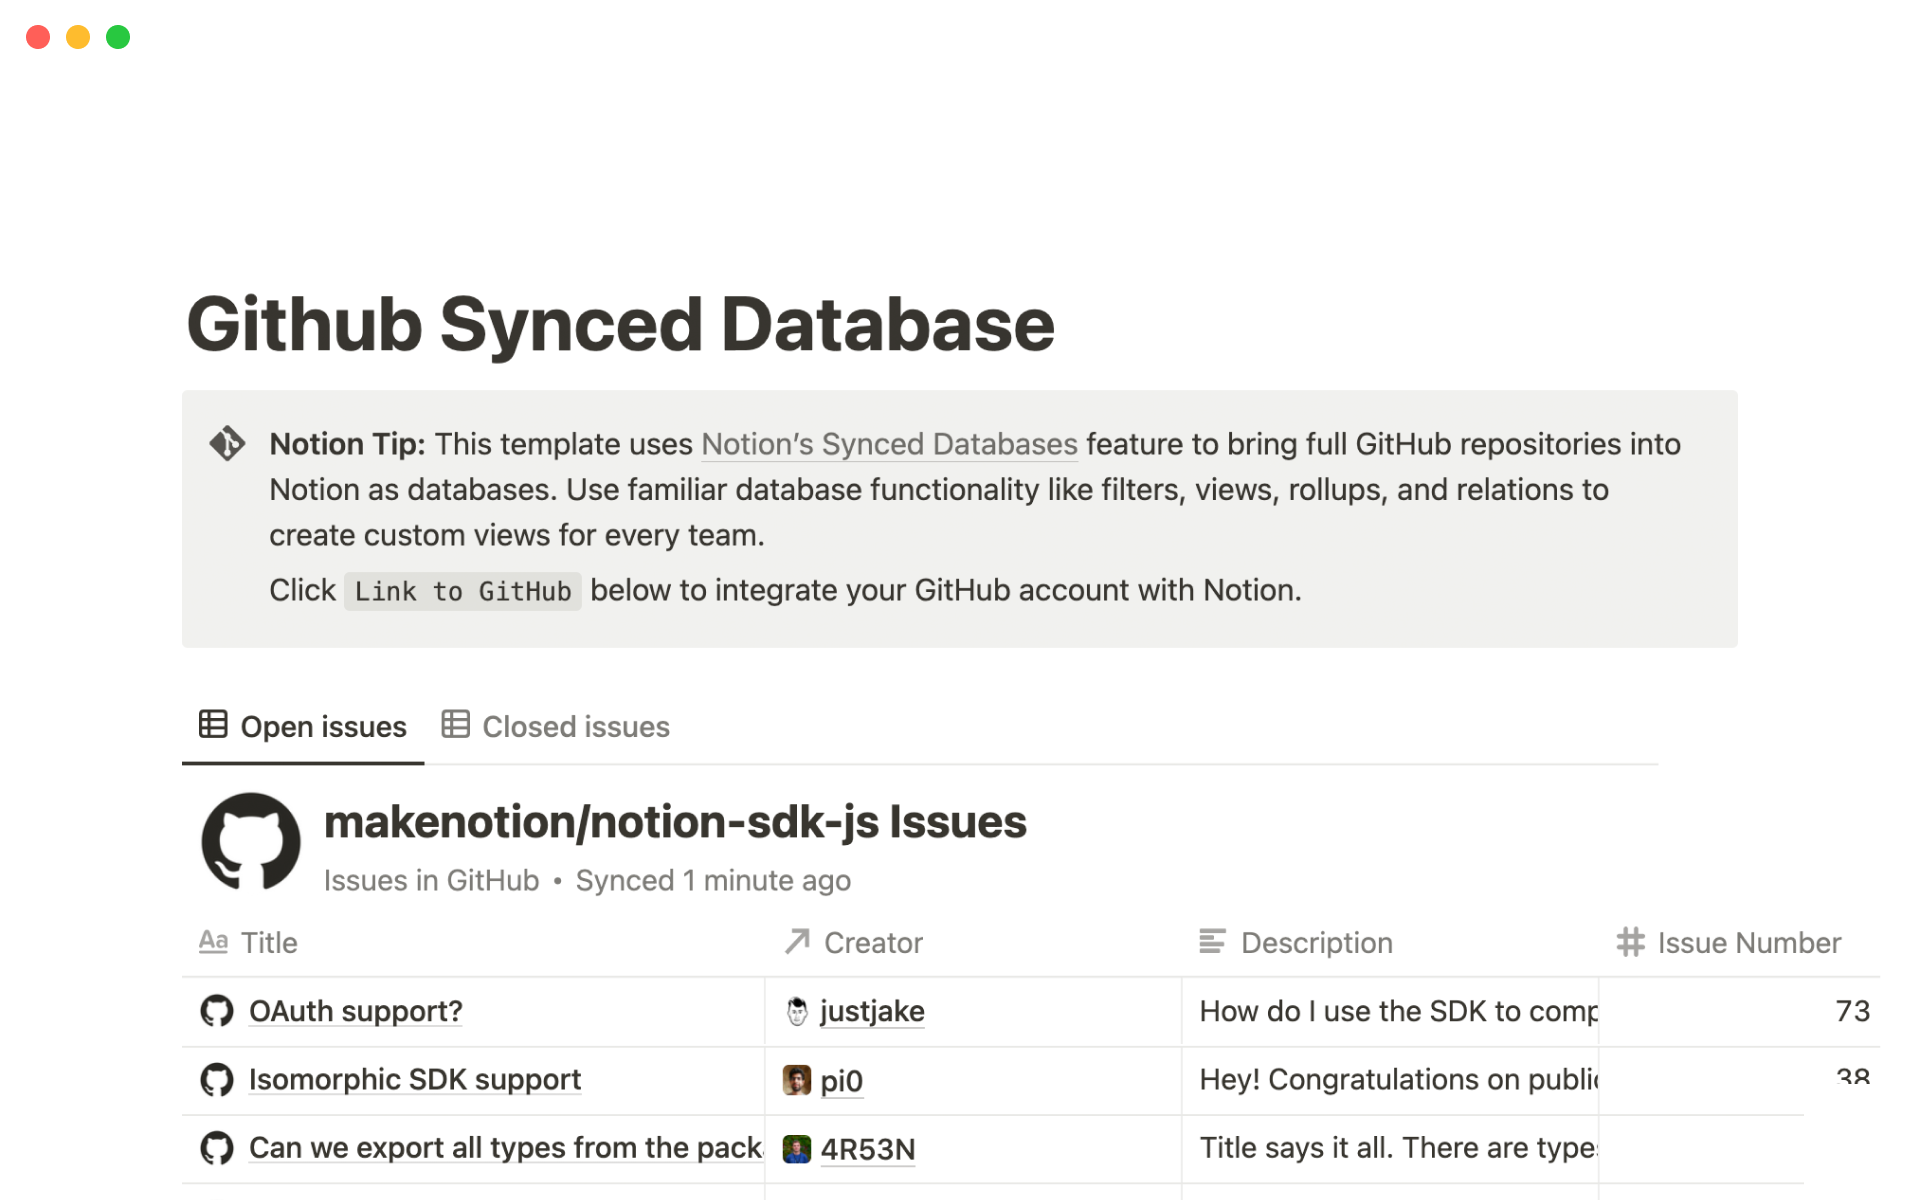 Use a synced database to bring full GitHub repositories into Notion as databases – and use database filters, views, rollups, and relations to create custom views for every team.